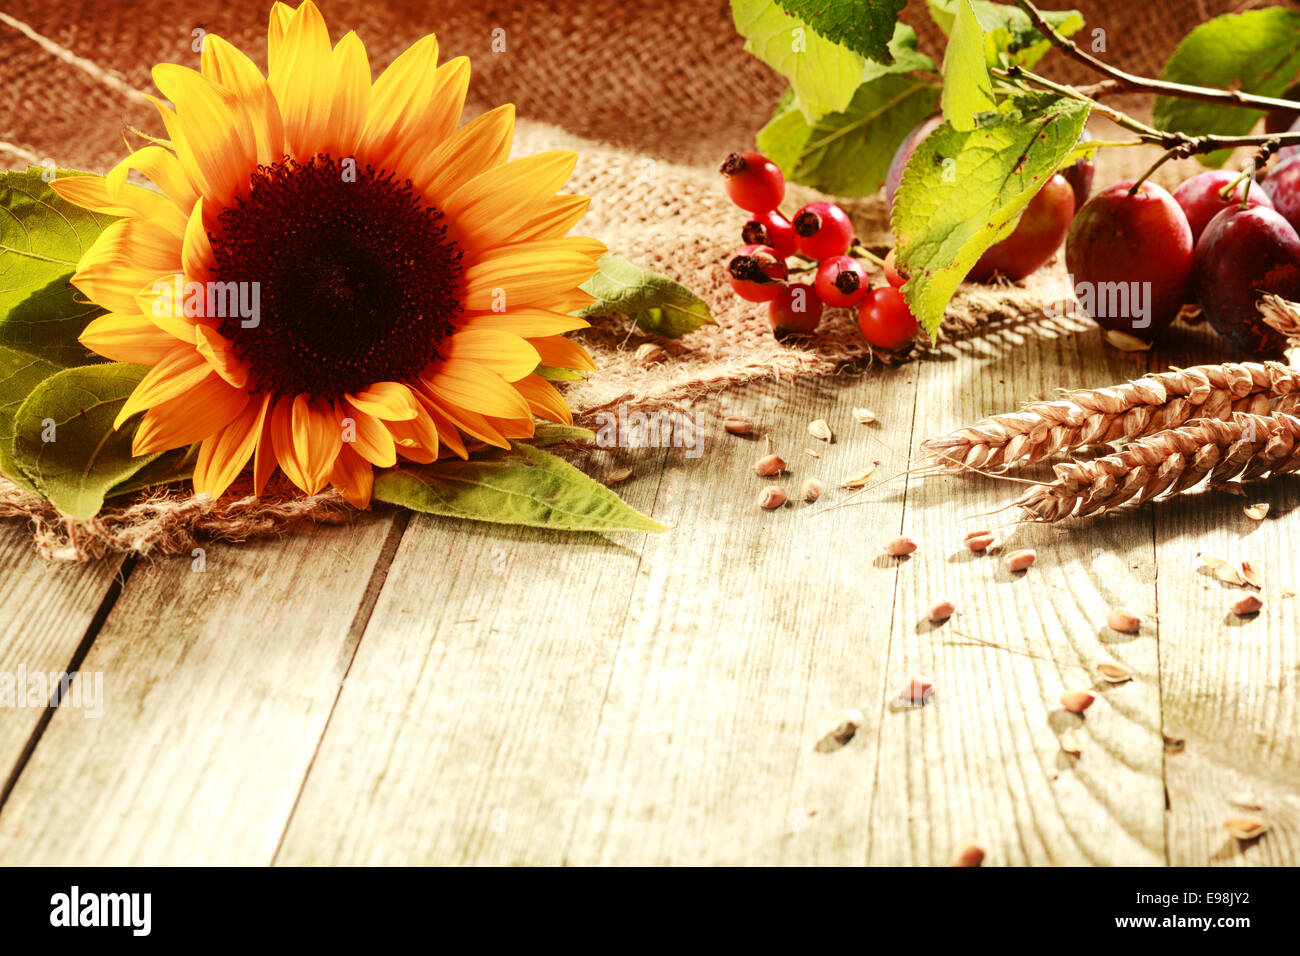 Colorful rustic Thanksgiving background with a vibrant yellow sunflower, ears of ripe wheat, rose hips and berries on a wooden table with copyspace Stock Photo